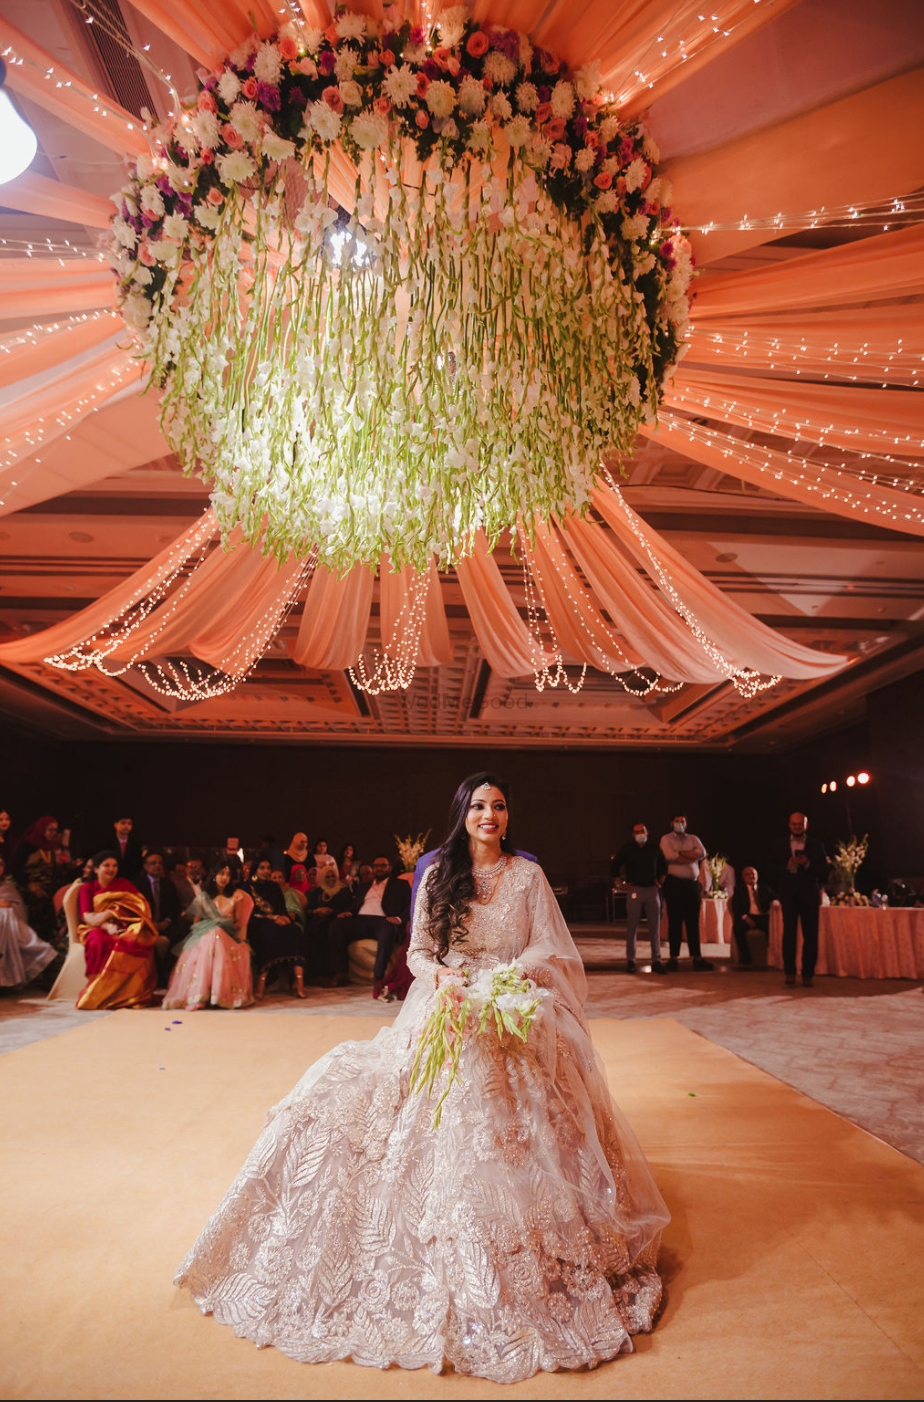 Photo of Bride dressed in an ivory applique work lehenga.